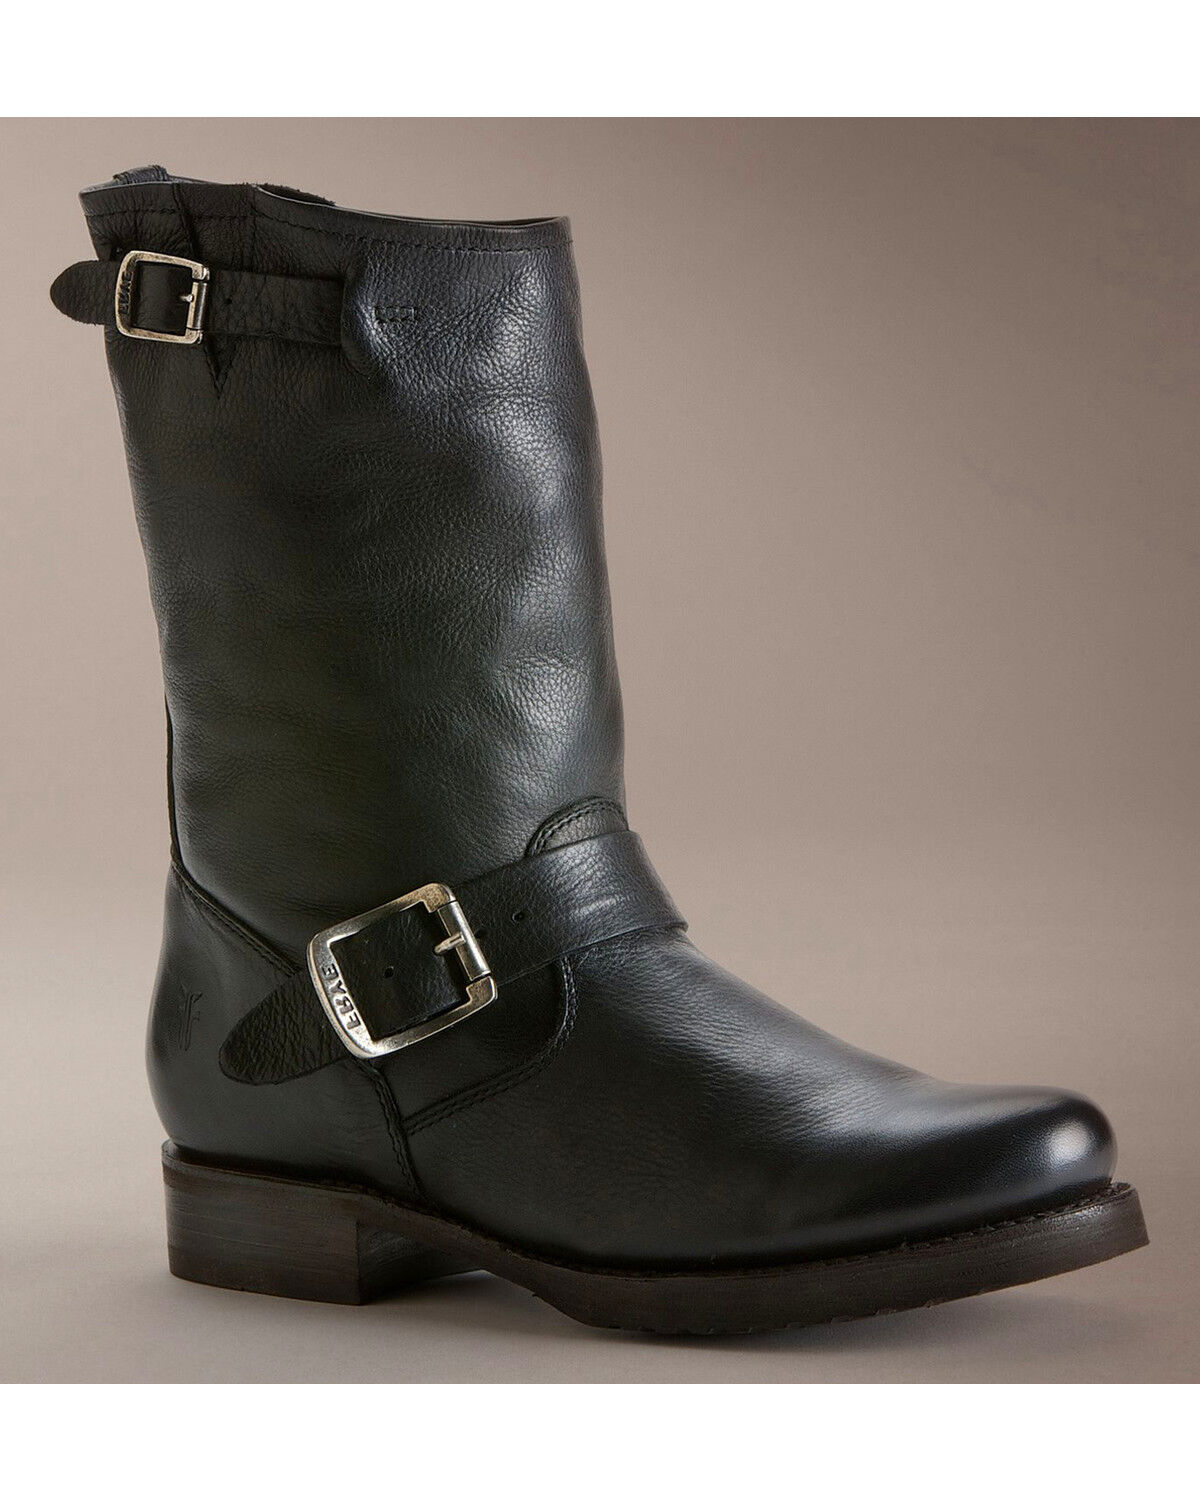 Women's Motorcycle Boots - Boot Barn